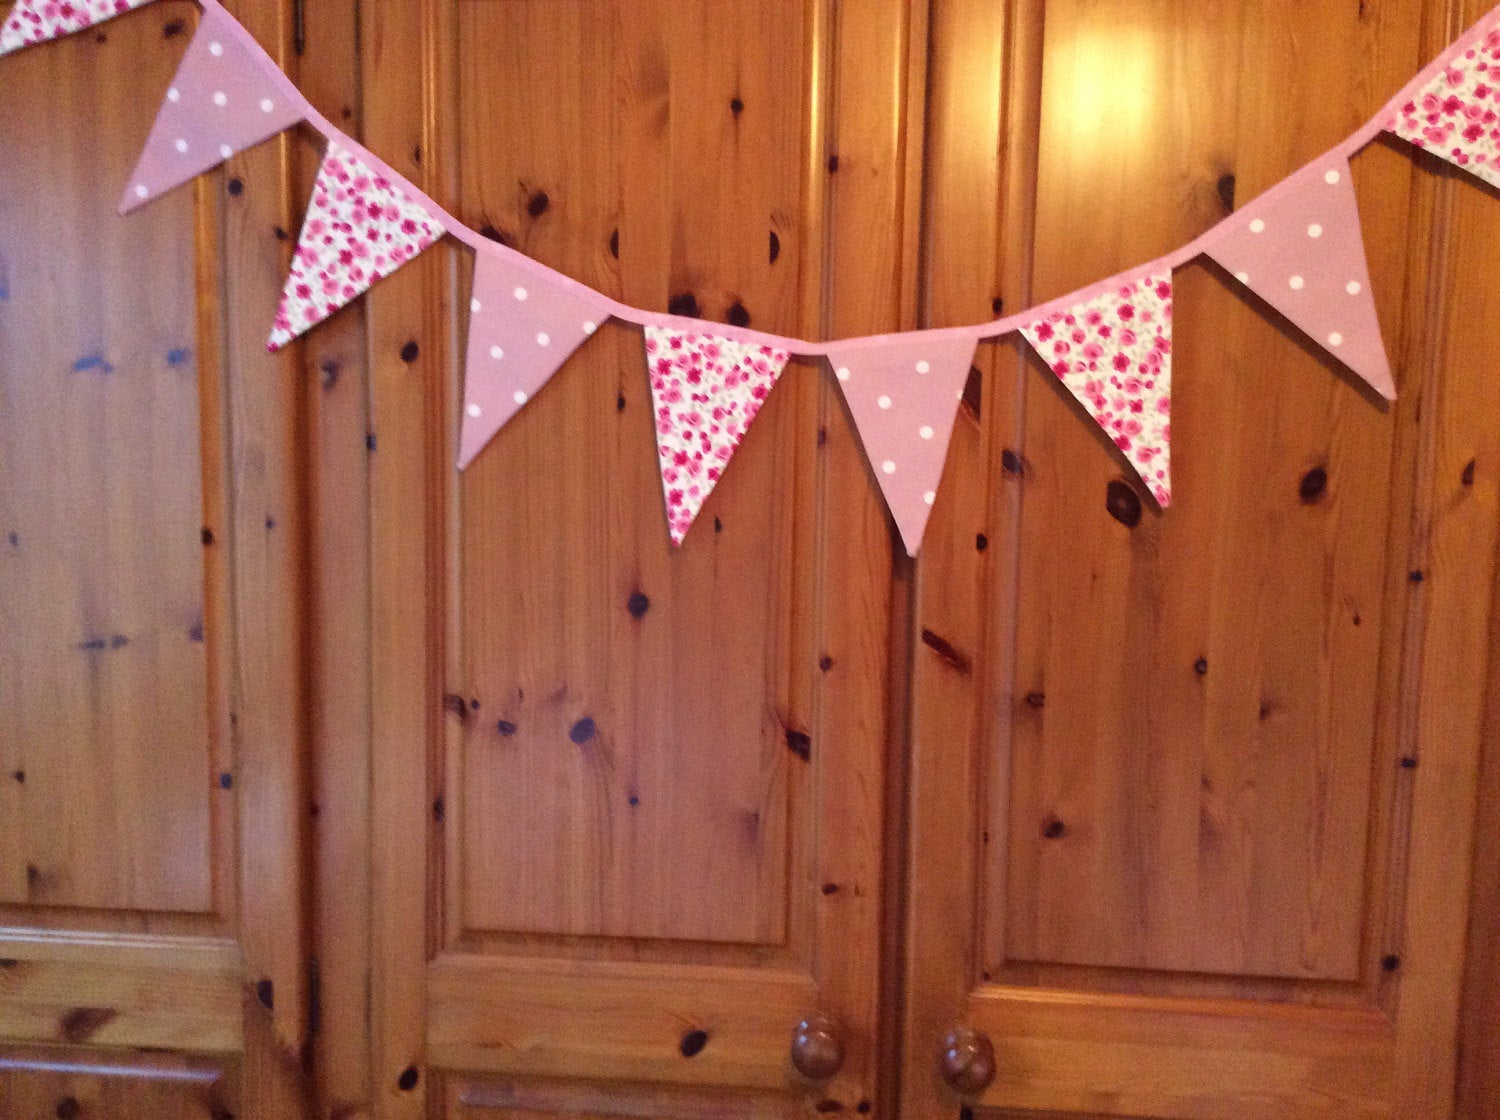 Bunting - pink spots and flowers